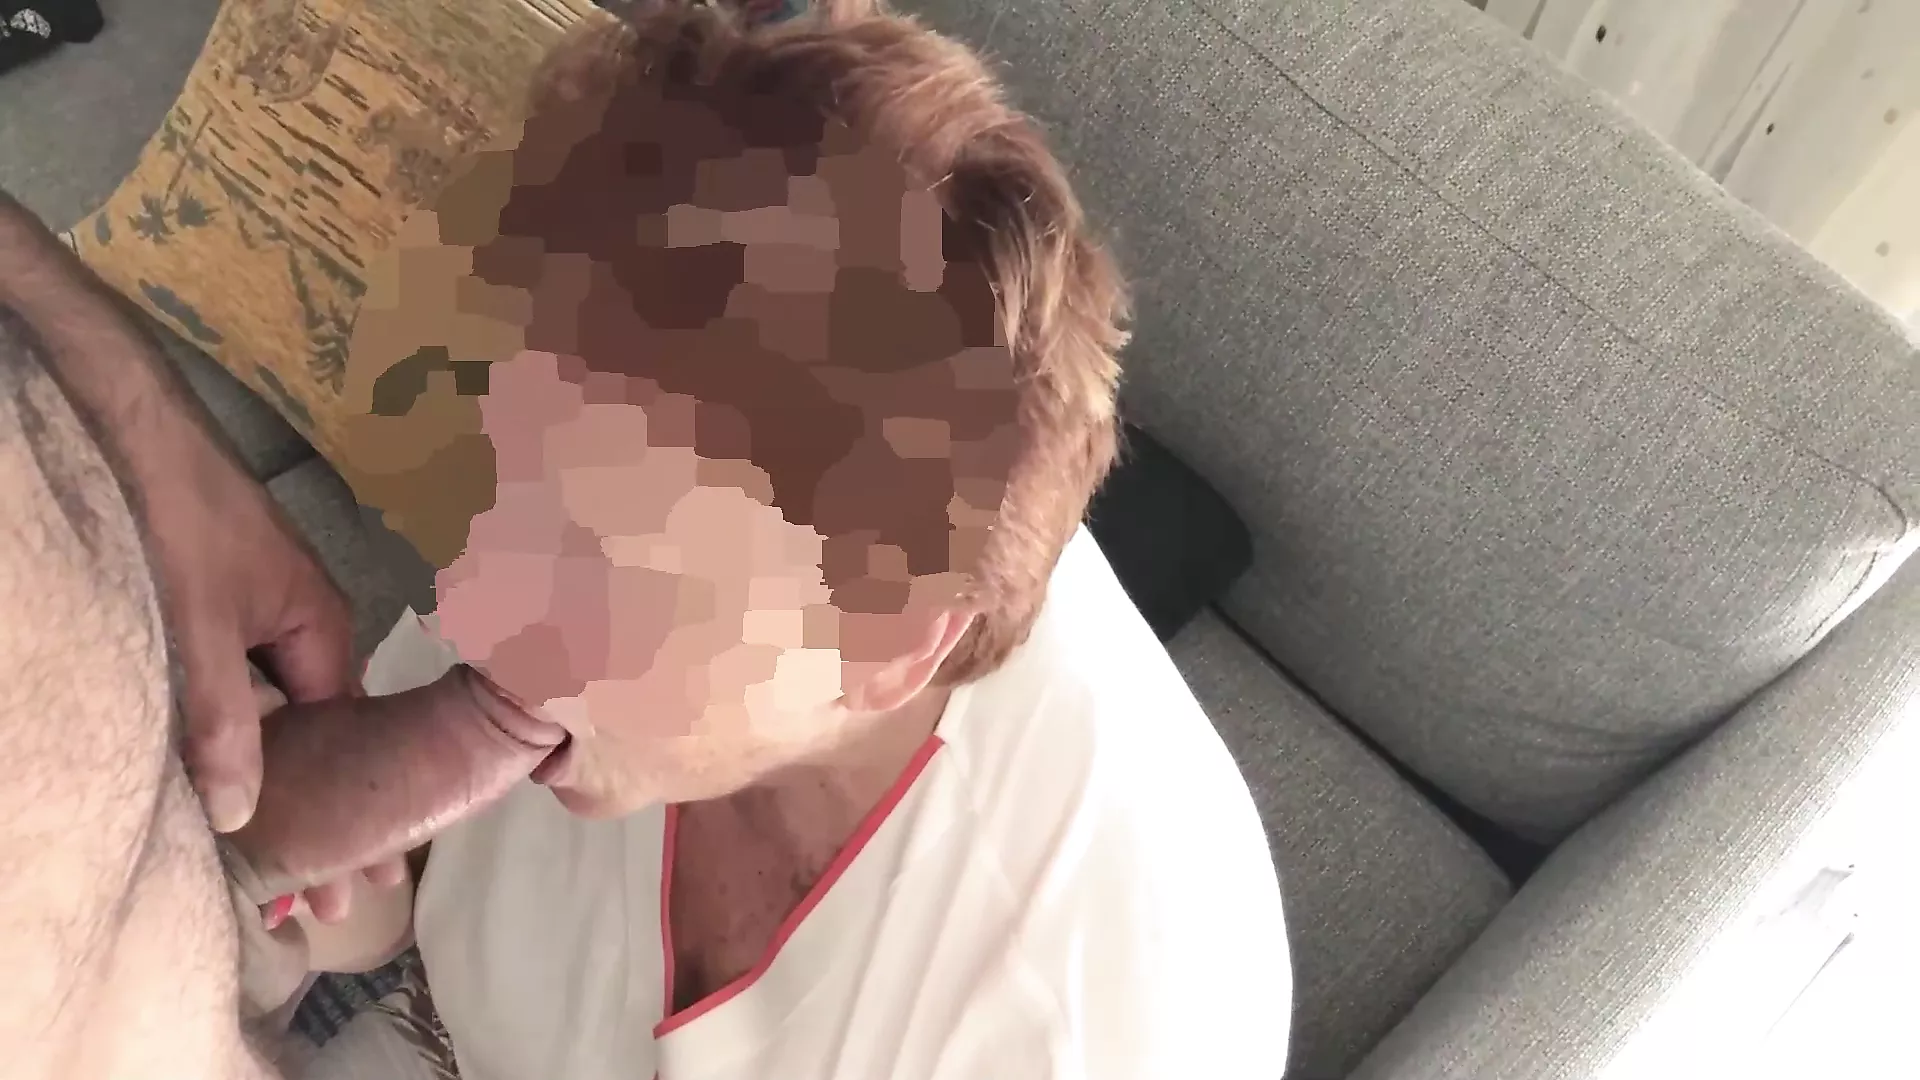 AMATEUR GRANNY PORN ANAL SEX AND CUM SWALLOWING WITH 80 YEARS OLD GRANDMA 